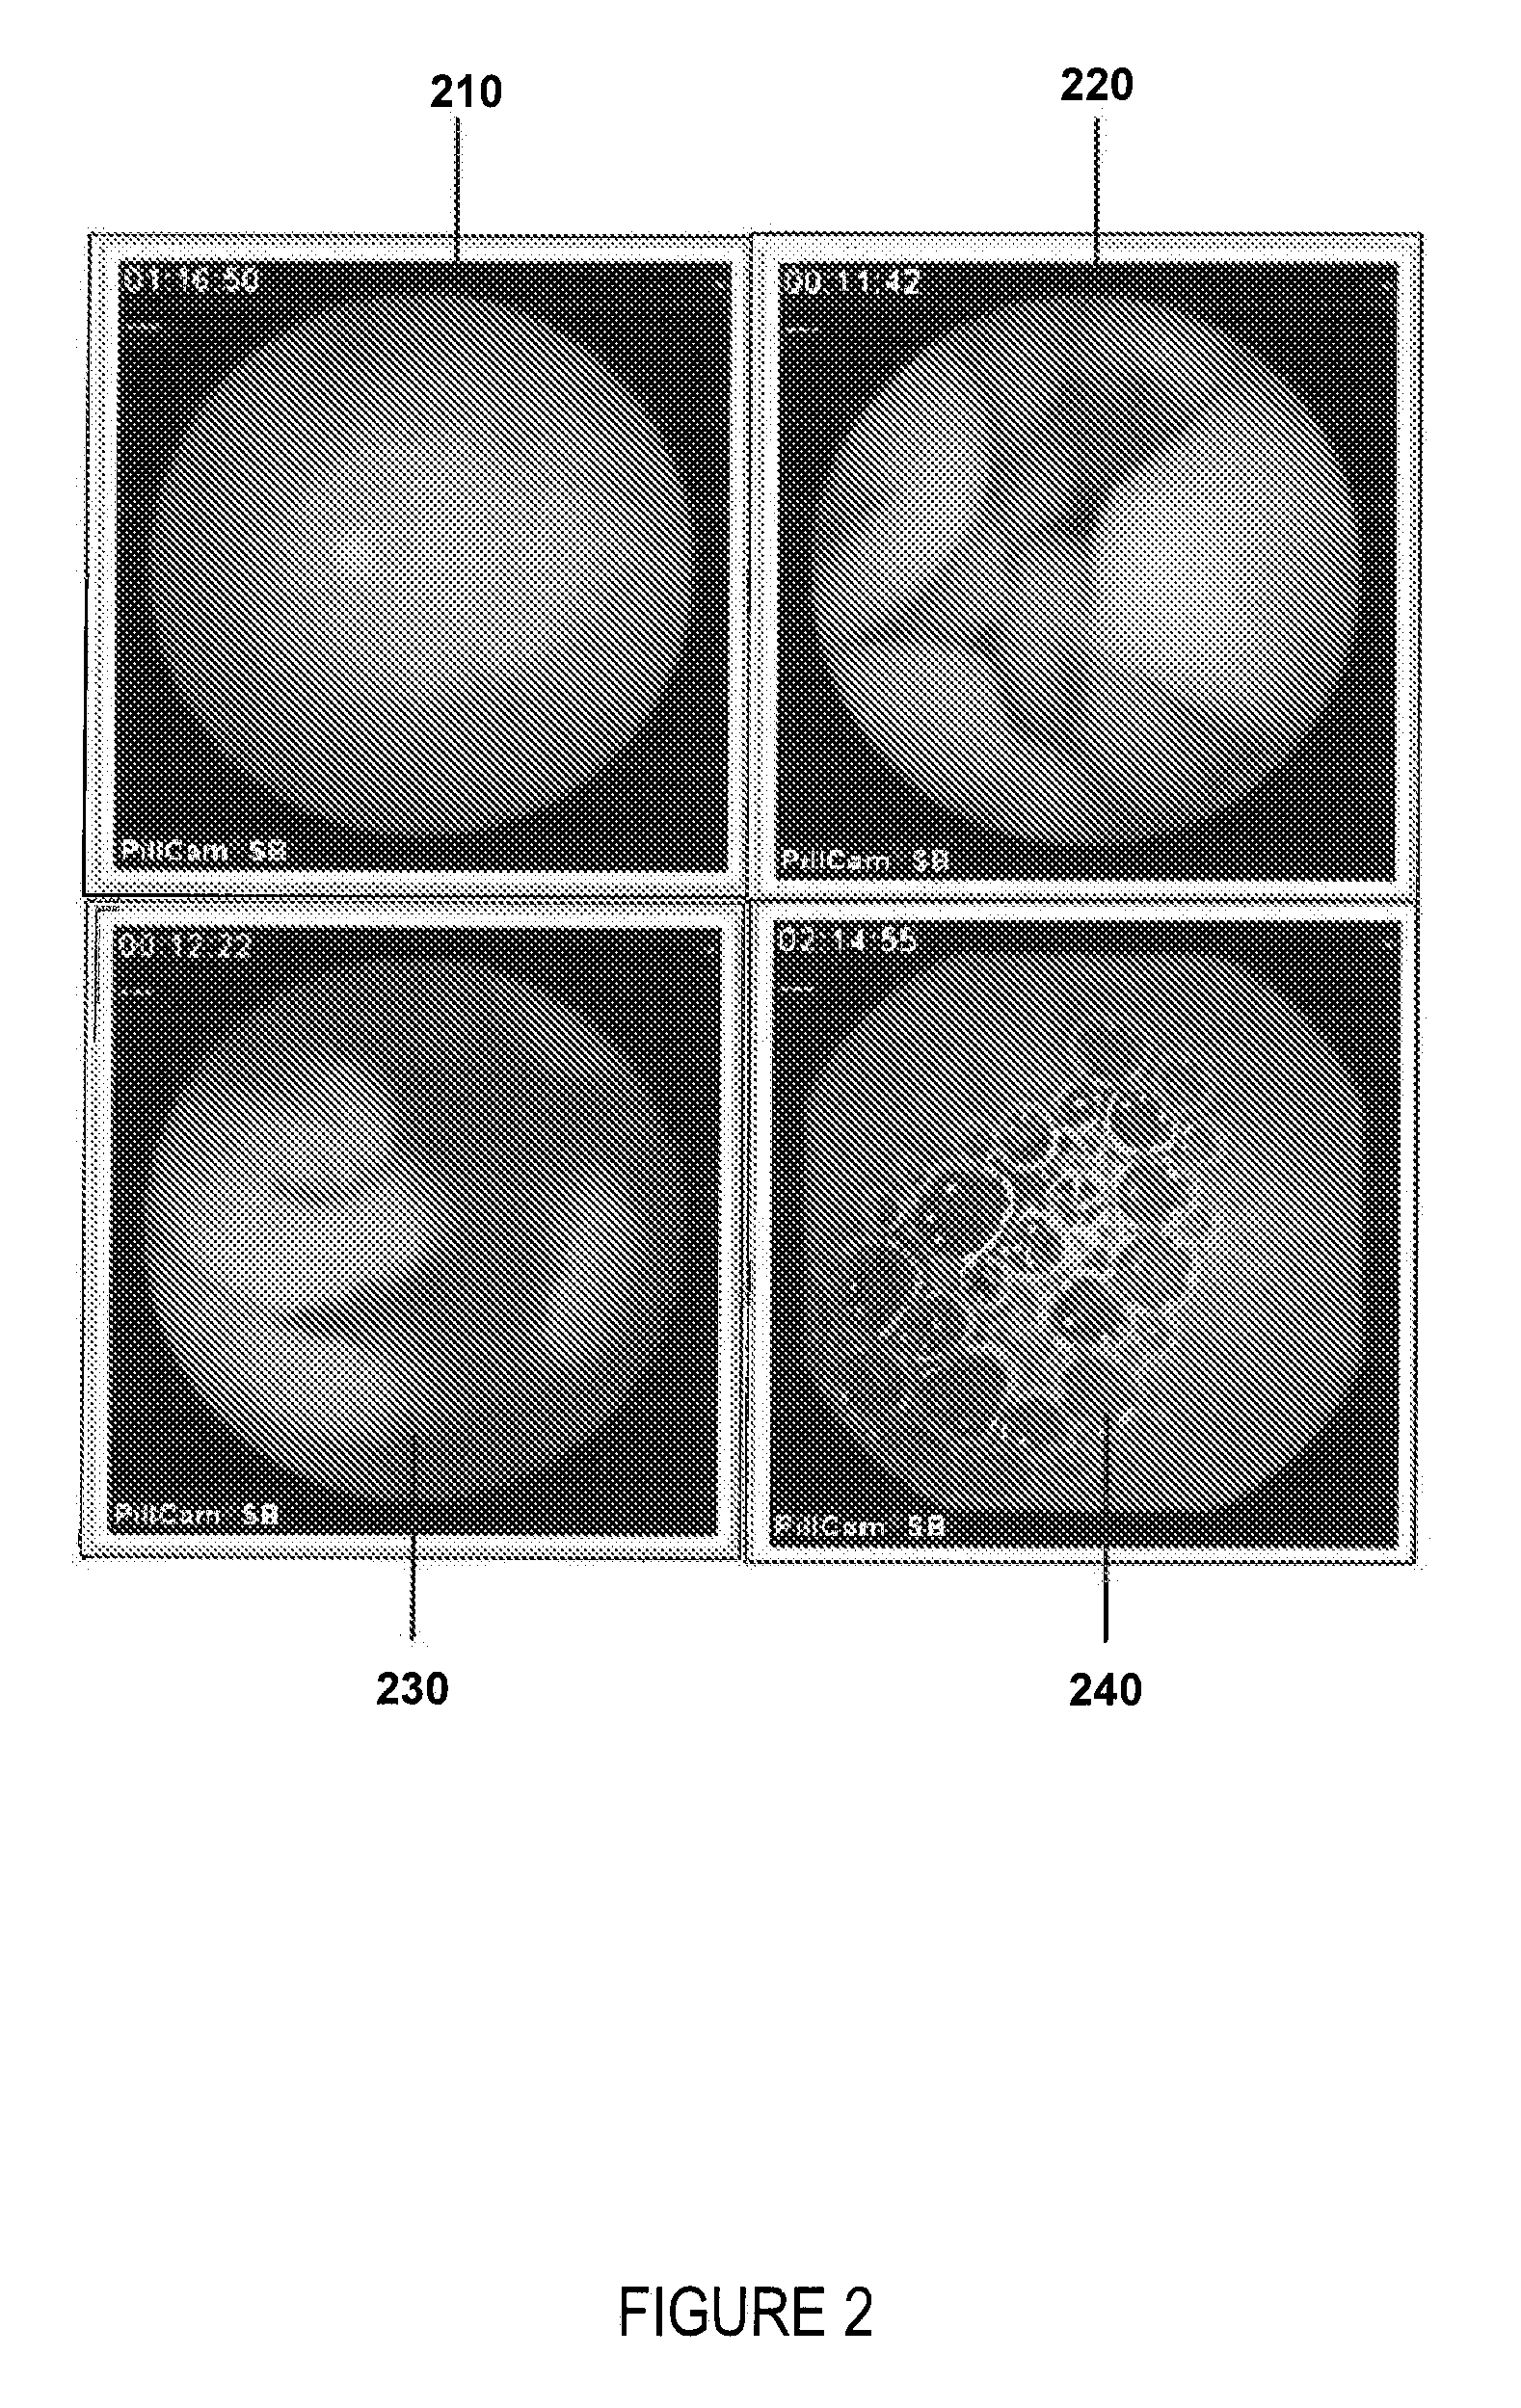 System and method for automated disease assessment in capsule endoscopy